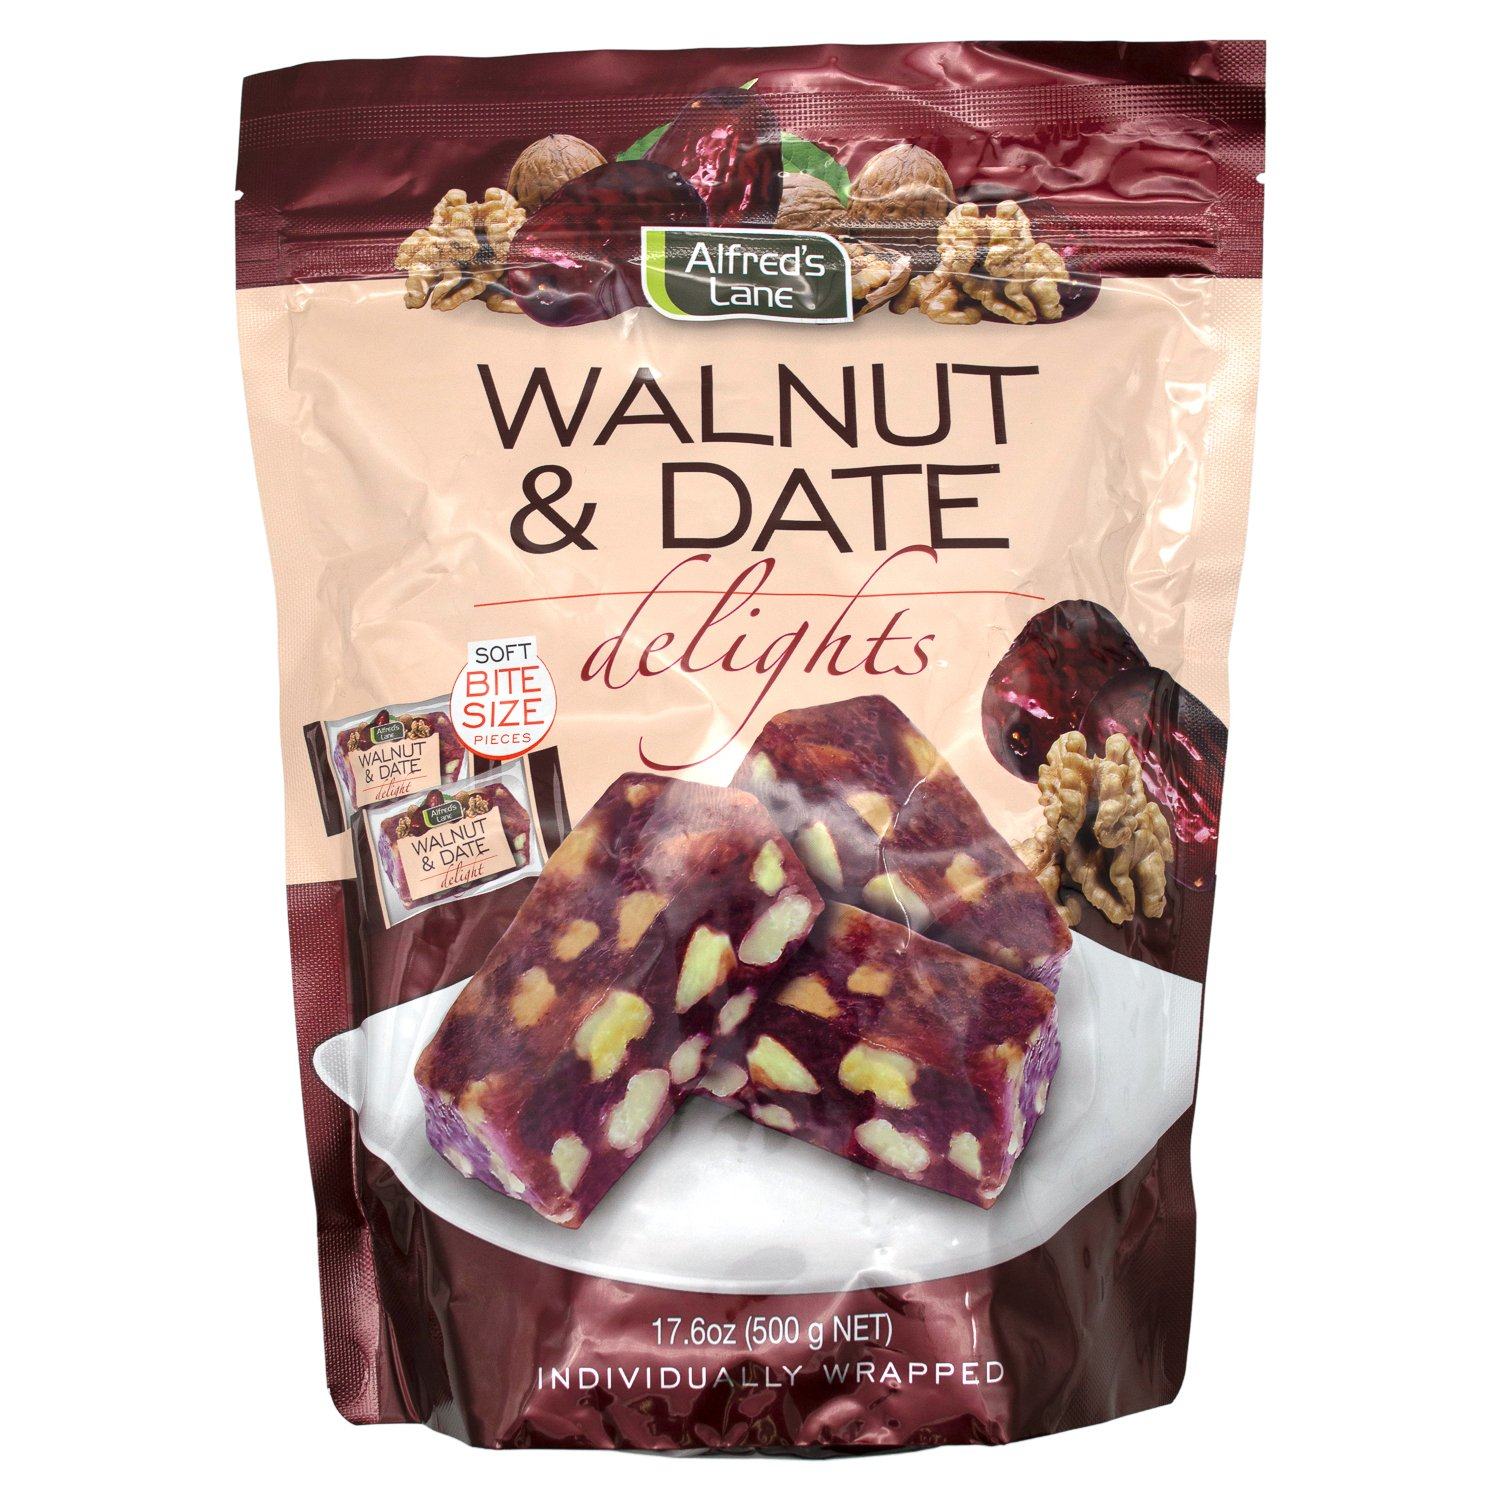 Alfred's Lane Walnut & Date Delights Alfred's Lane Original 17.6 Ounce 